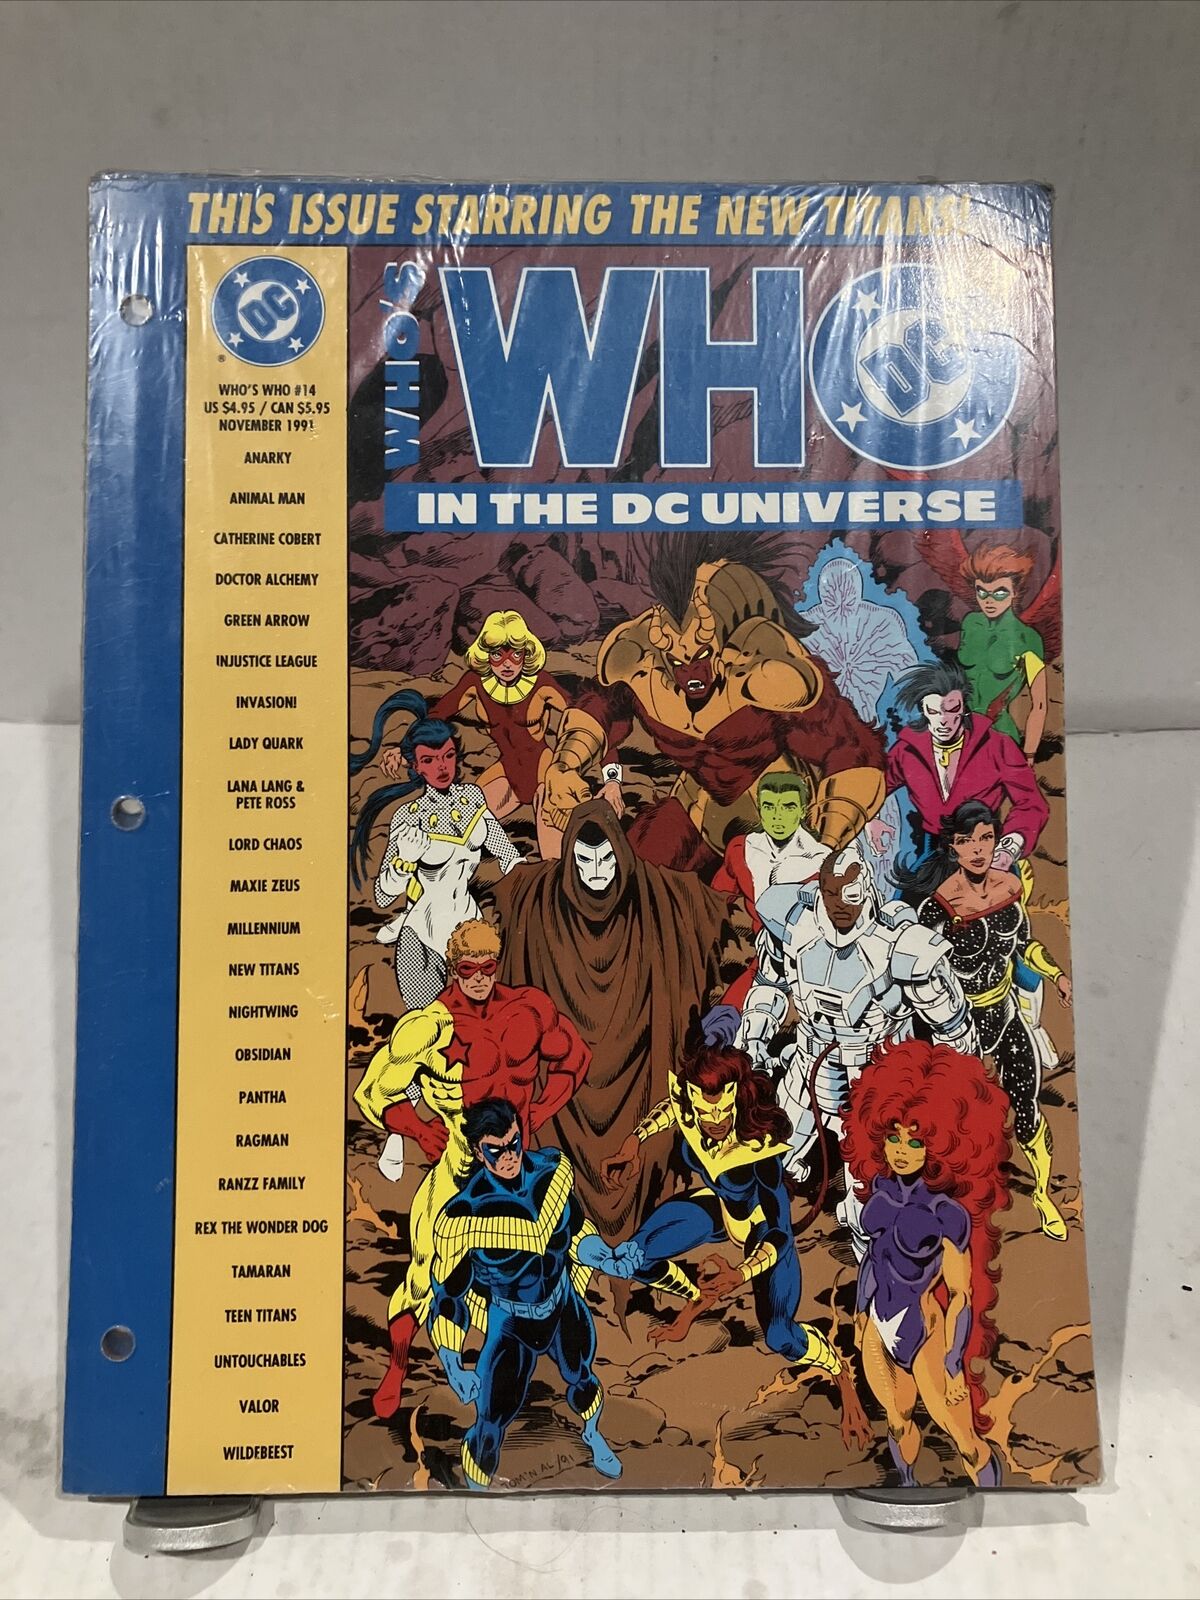 WHO'S WHO IN THE DC UNIVERSE # 14 LOOSE LEAF SEALED 1991 NEW TEEN TITANS